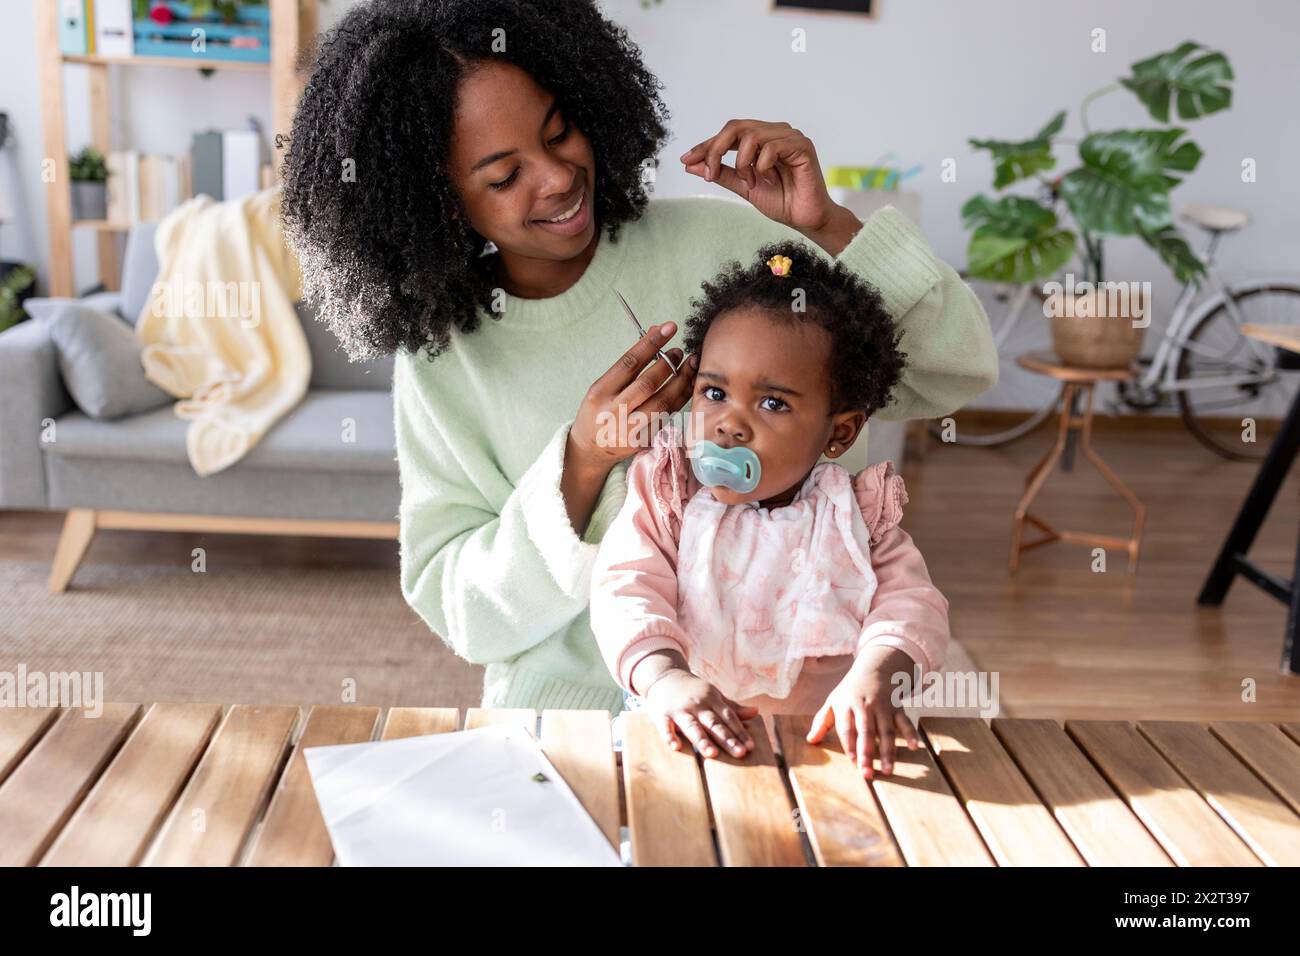 Smiling single mother with scissors cutting hair of baby girl at home Stock Photo